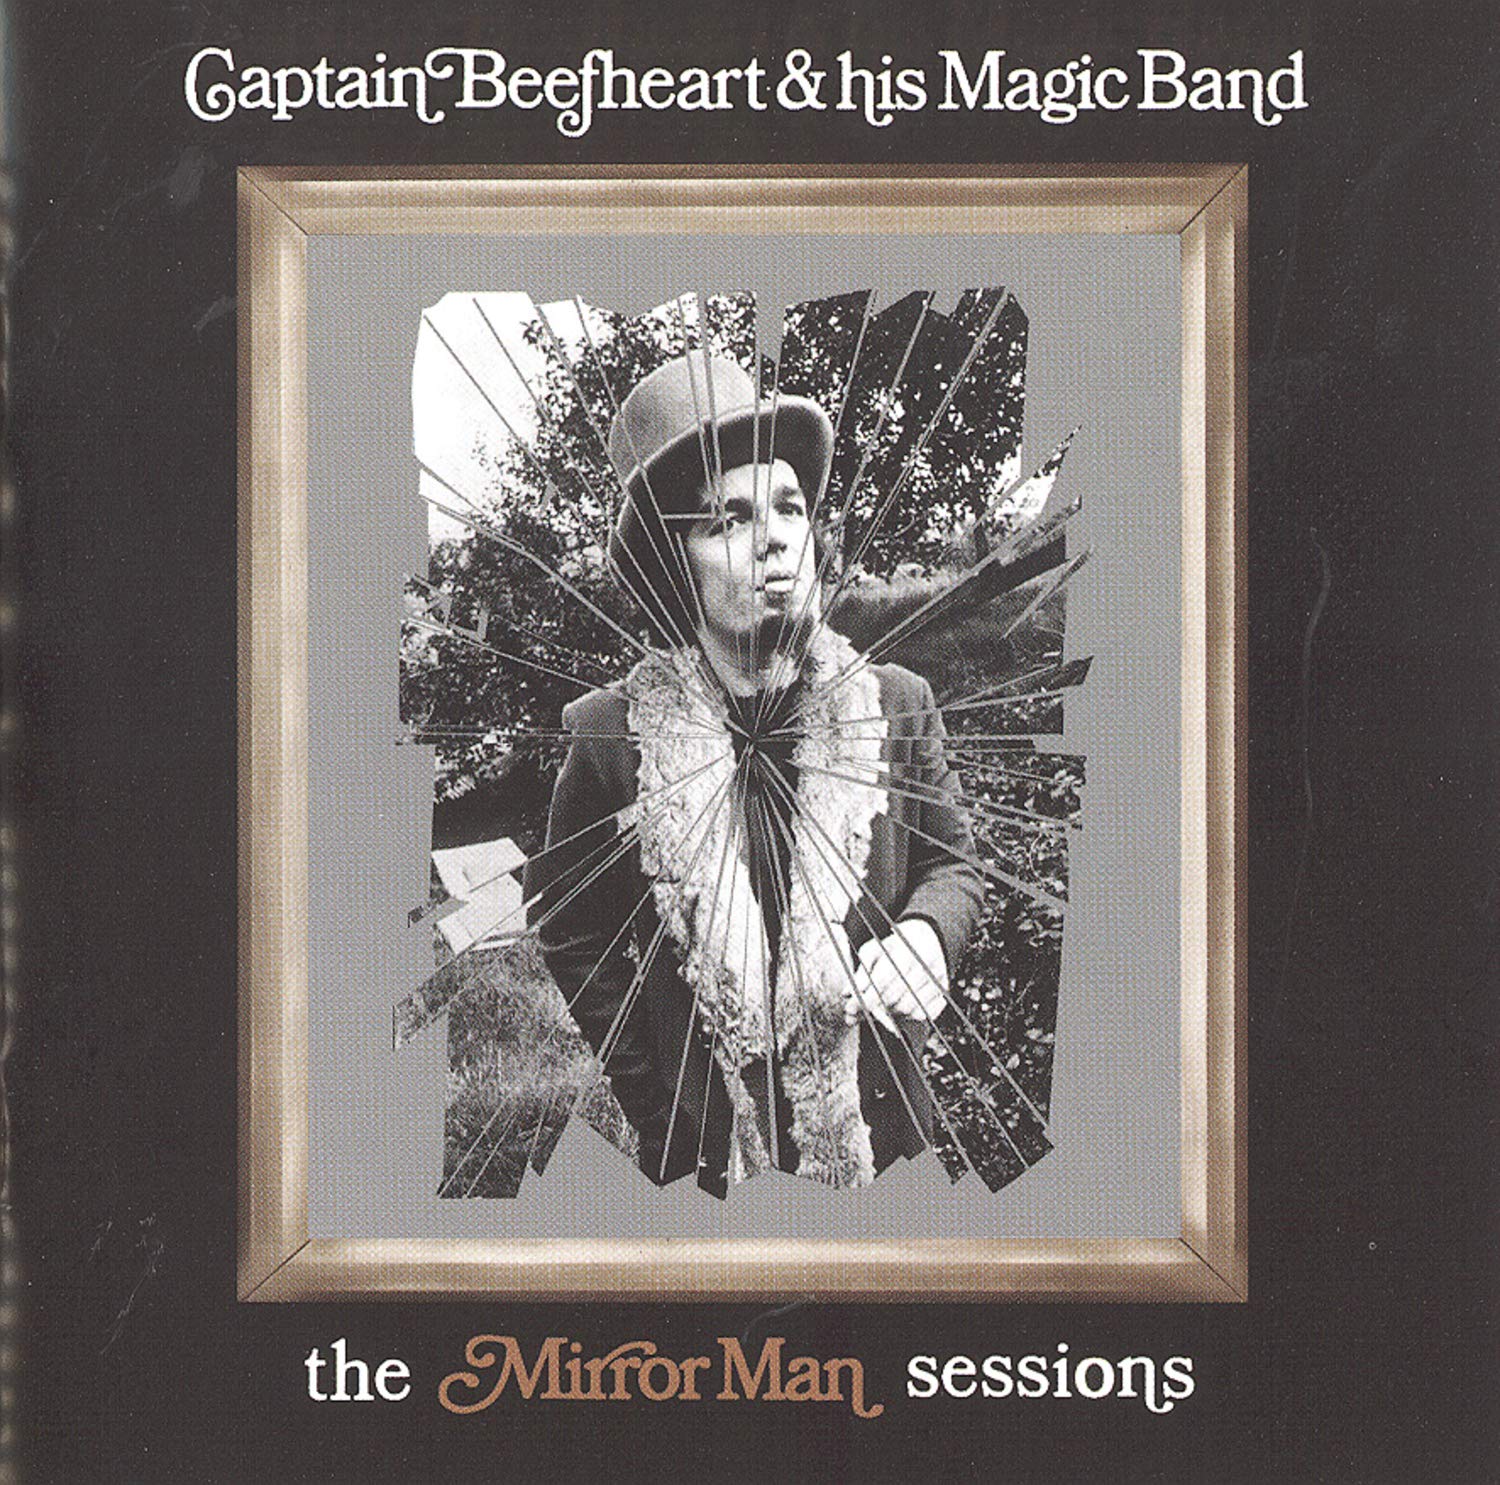 CAPTAIN BEEFHEART & HIS MAGIC BAND - The Mirror Man Sessions - 2LP - Limited & Numbered Crystal Clear 180g Vinyl